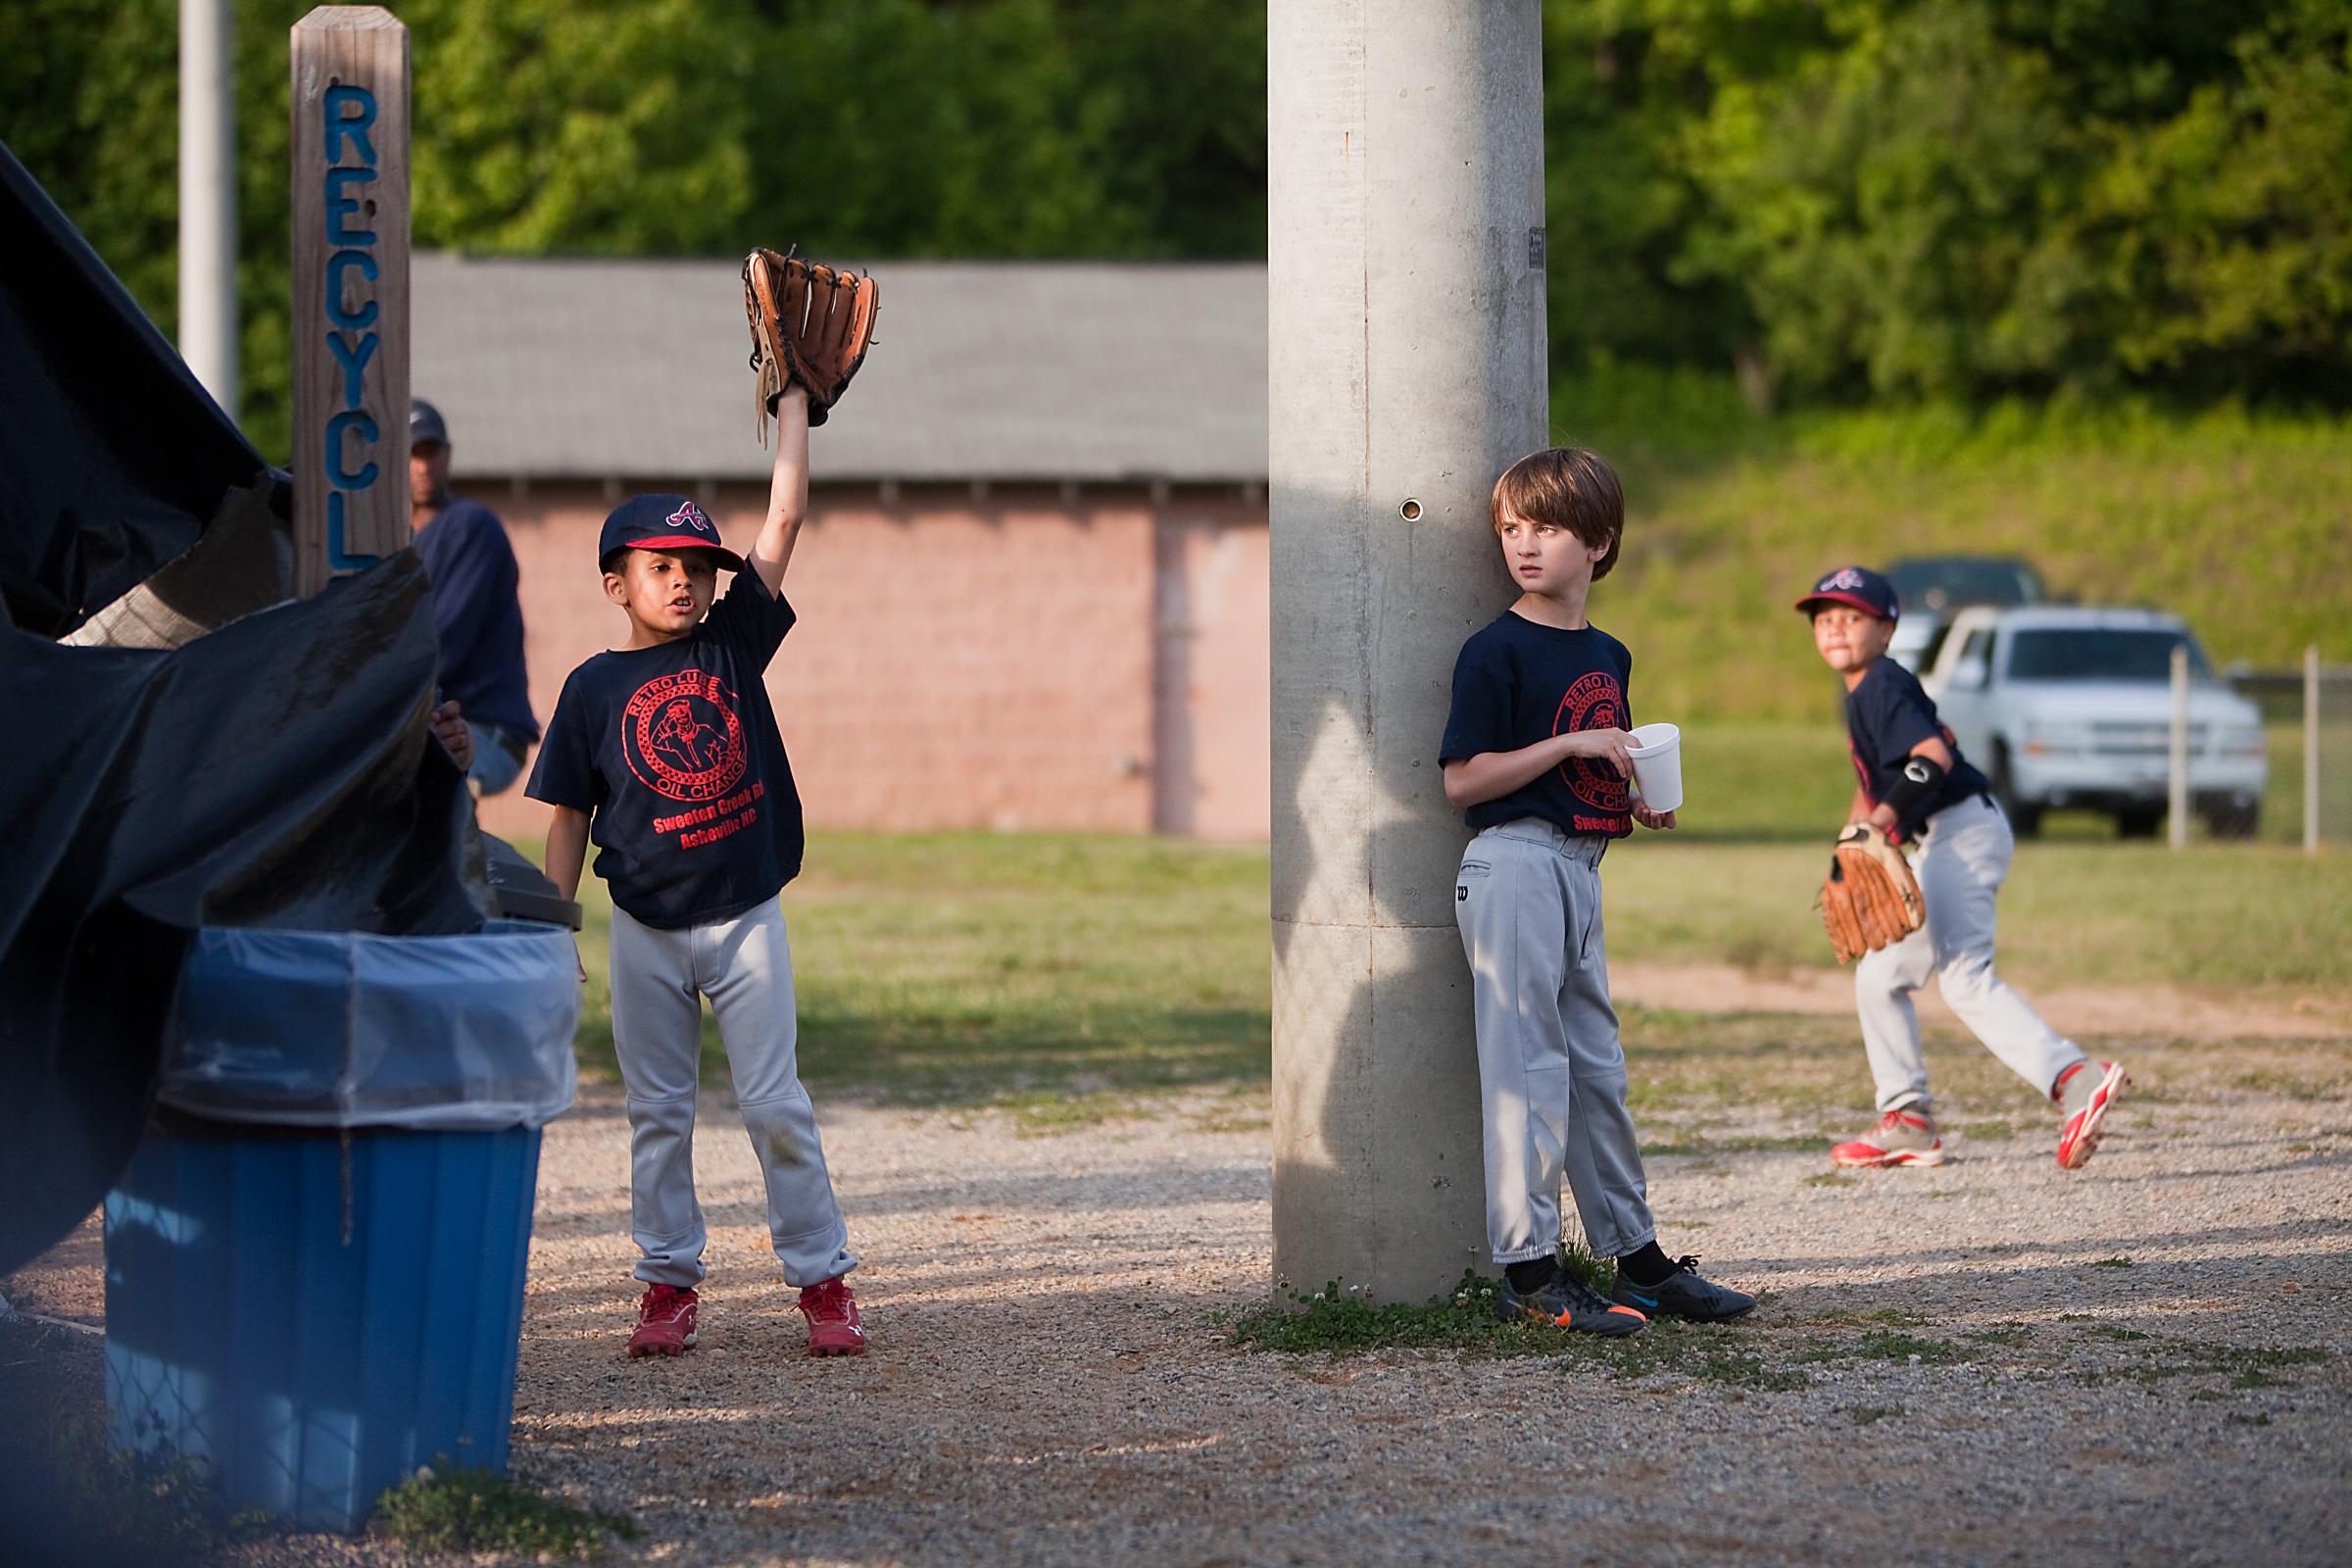 Growing Up - Baseball players practice and hang out between games.